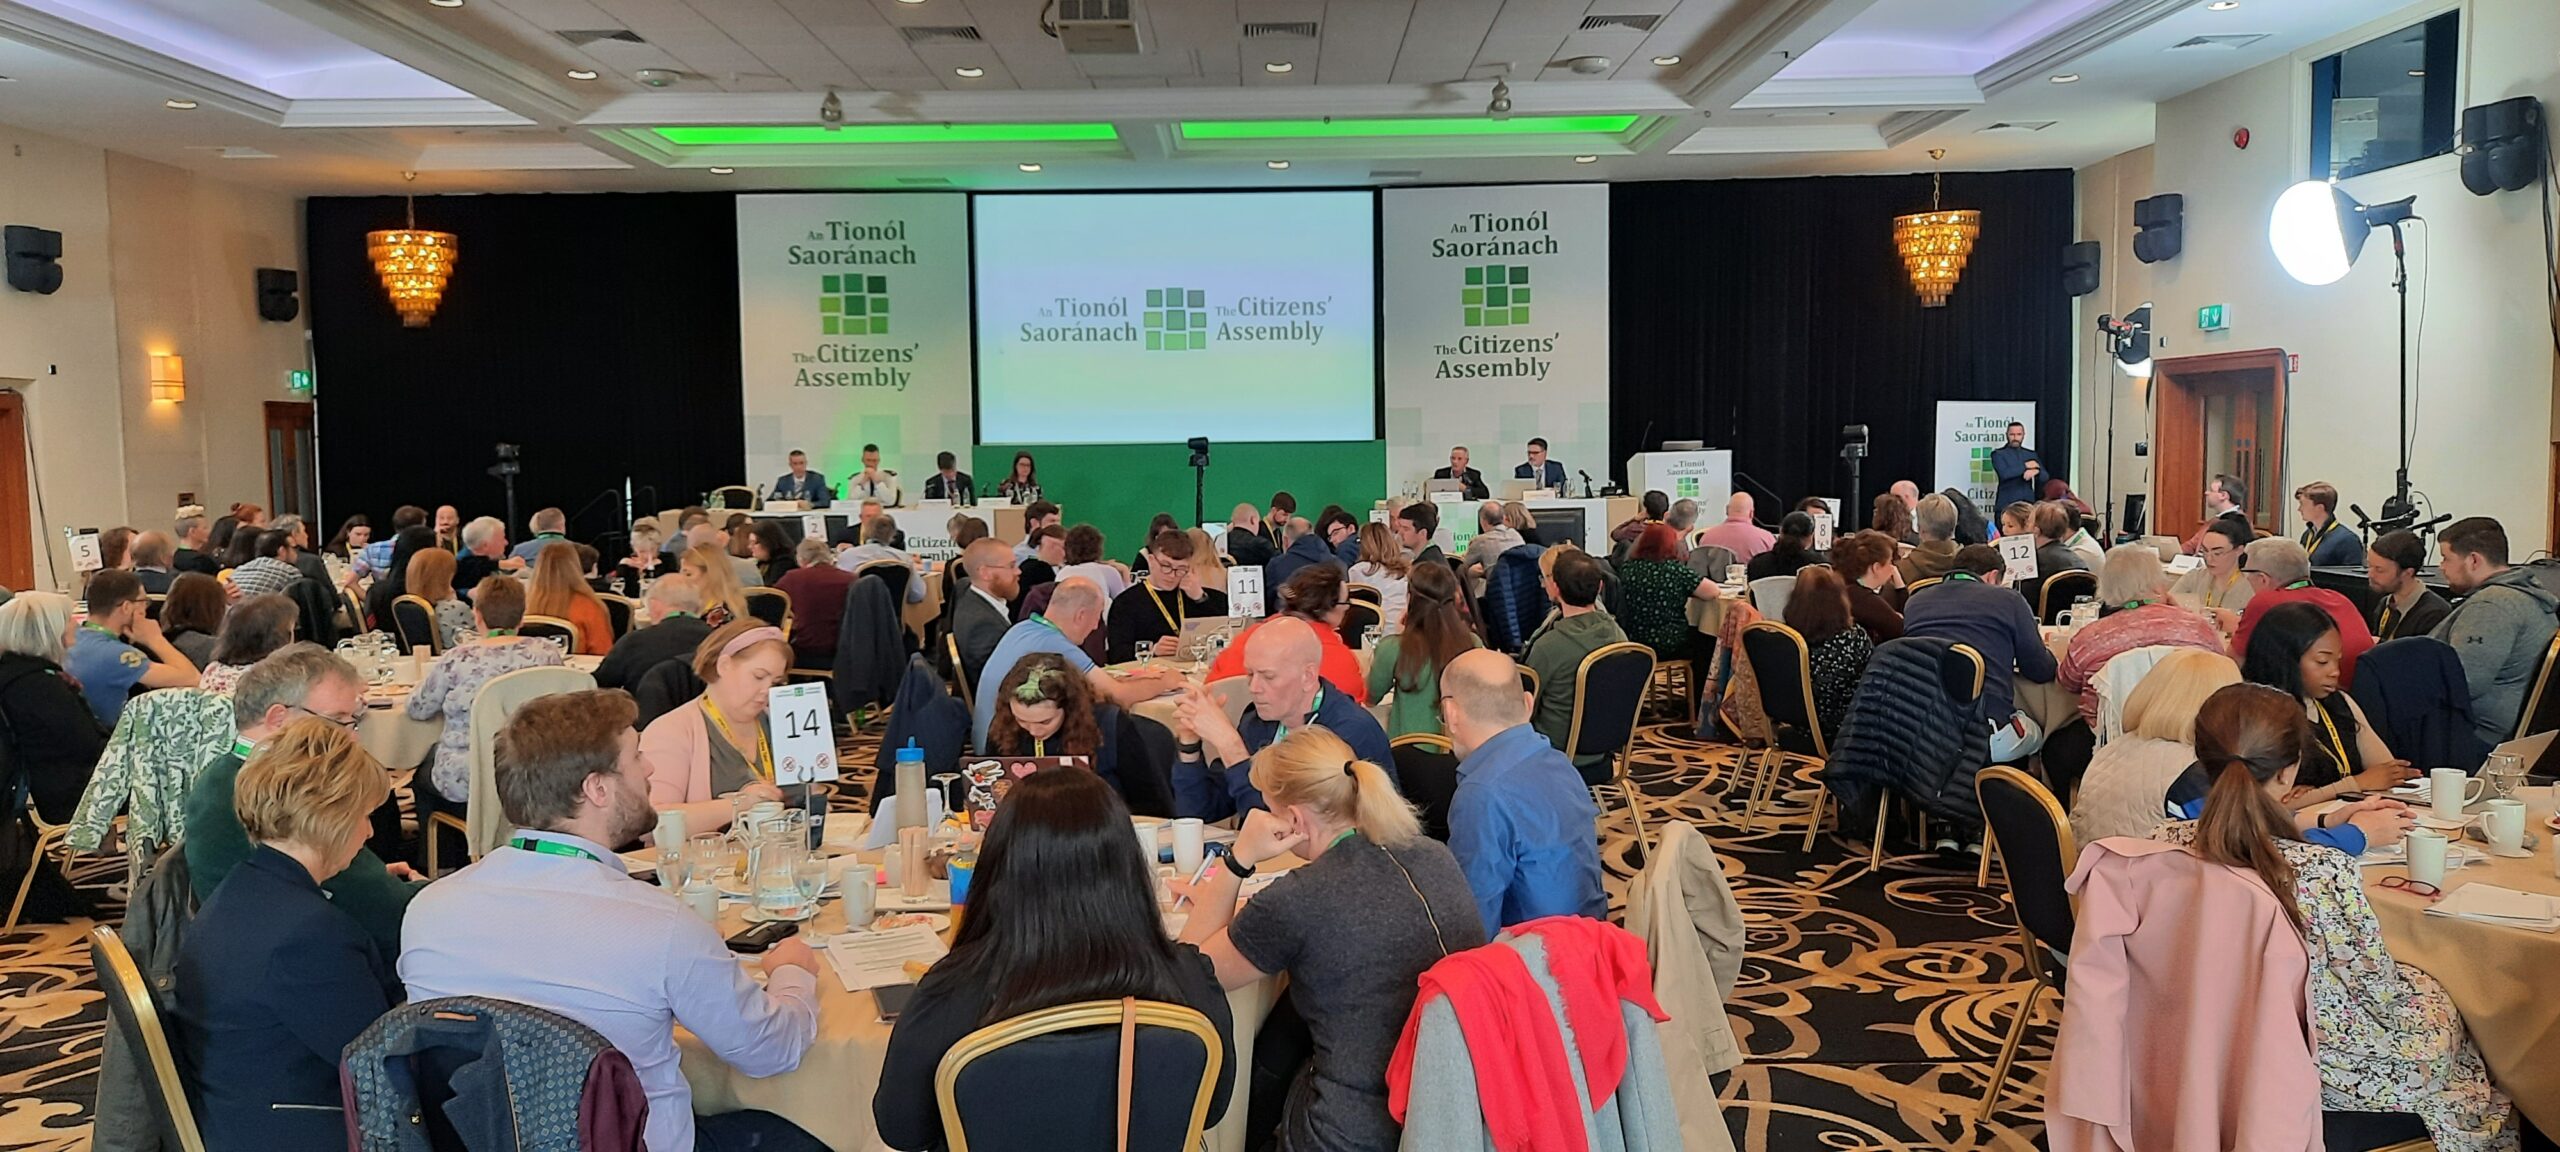 Citizens’ Assembly on Drugs Use concludes inaugural meeting – Chair Paul Reid says language is a key issue in how we approach drugs use and policy